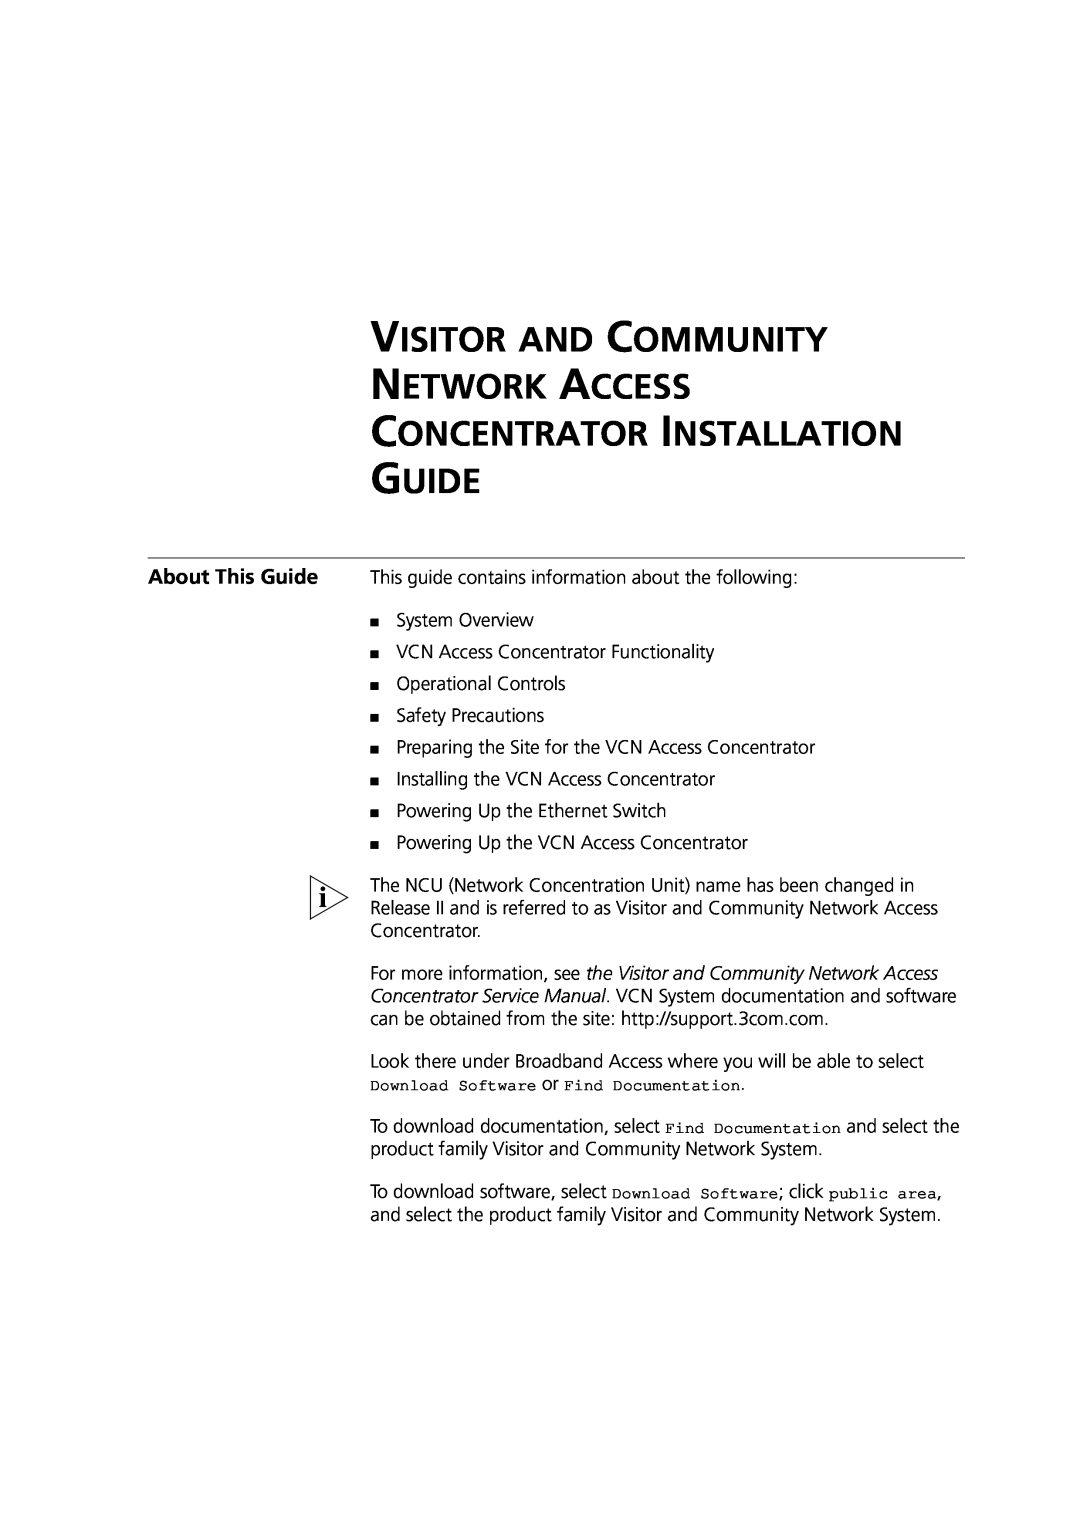 3Com DIA3CV1100-02 manual Visitor And Community Network Access Concentrator Installation Guide 